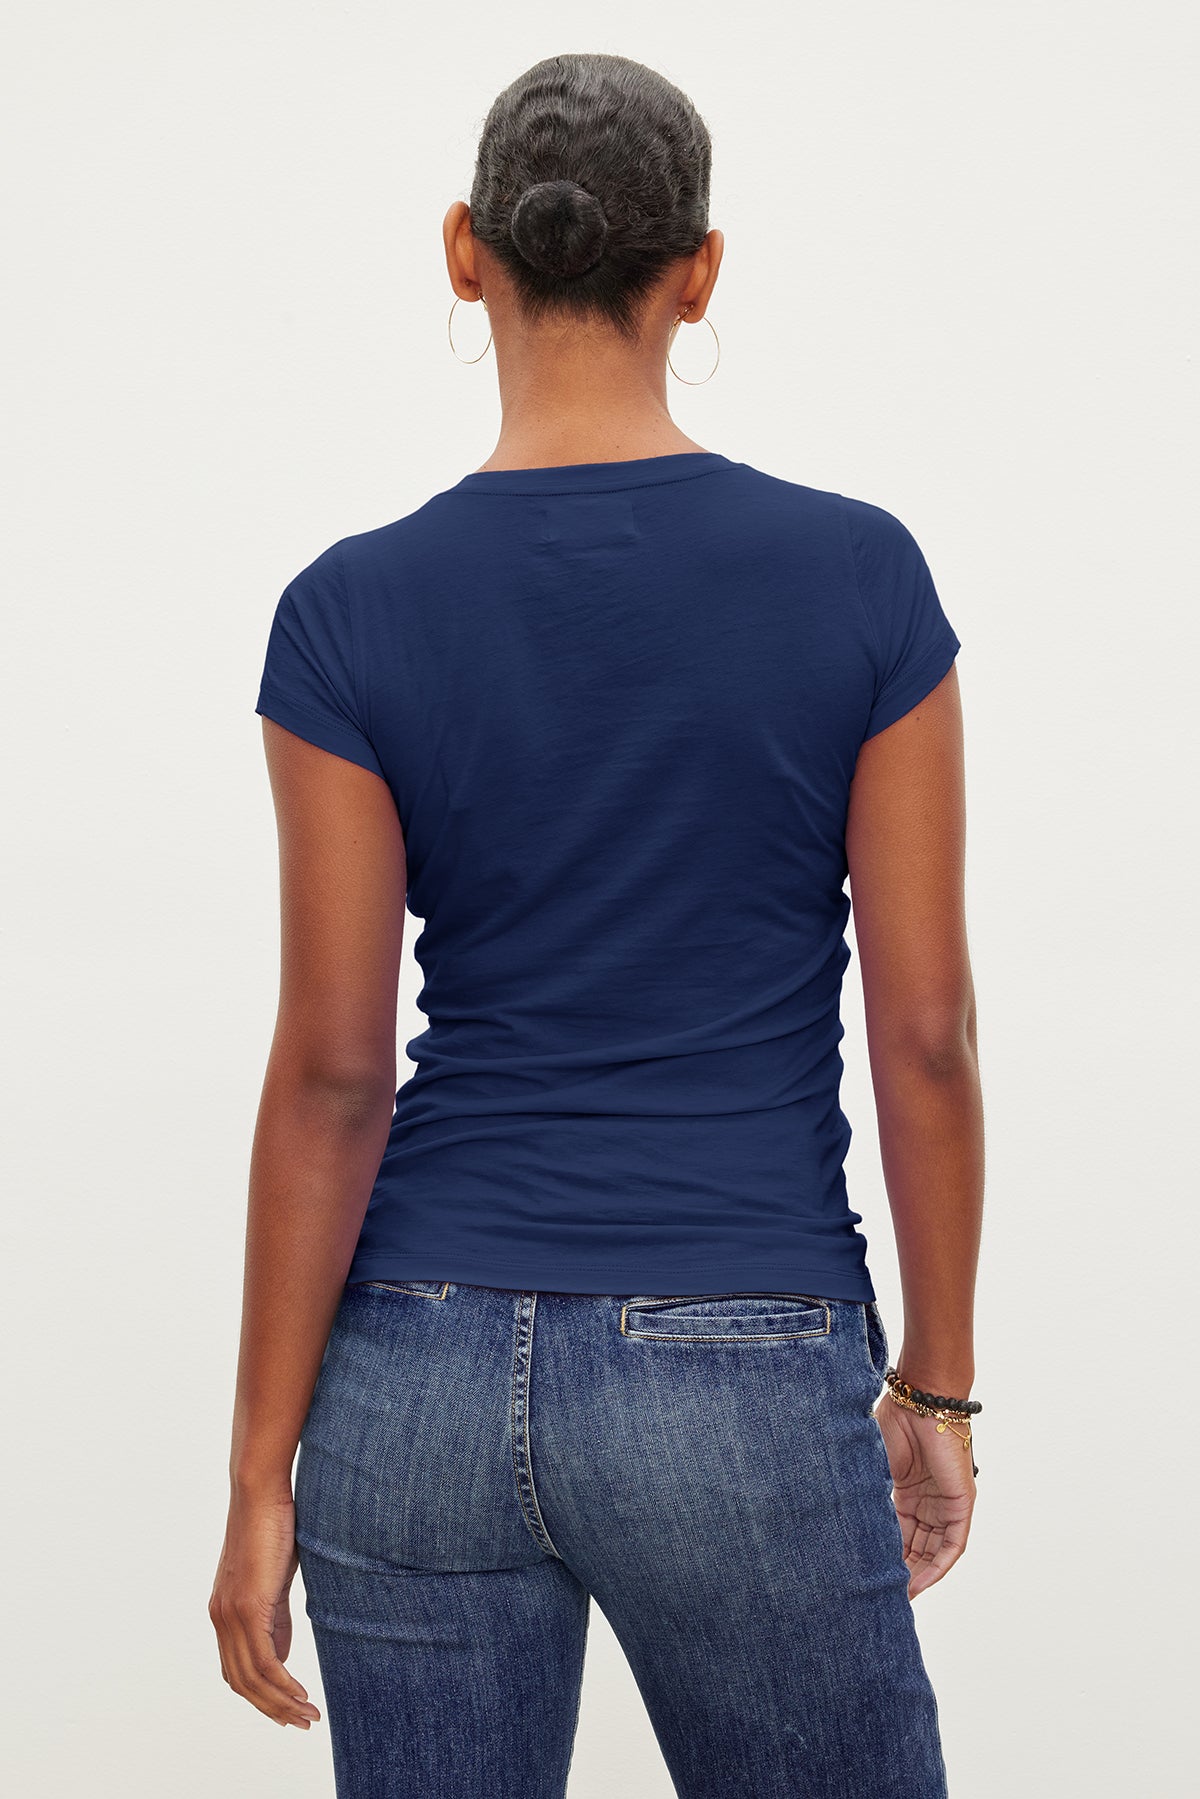 The back view of a woman wearing jeans and a Velvet by Graham & Spencer JEMMA GAUZY WHISPER FITTED CREW NECK TEE.-35571890847937